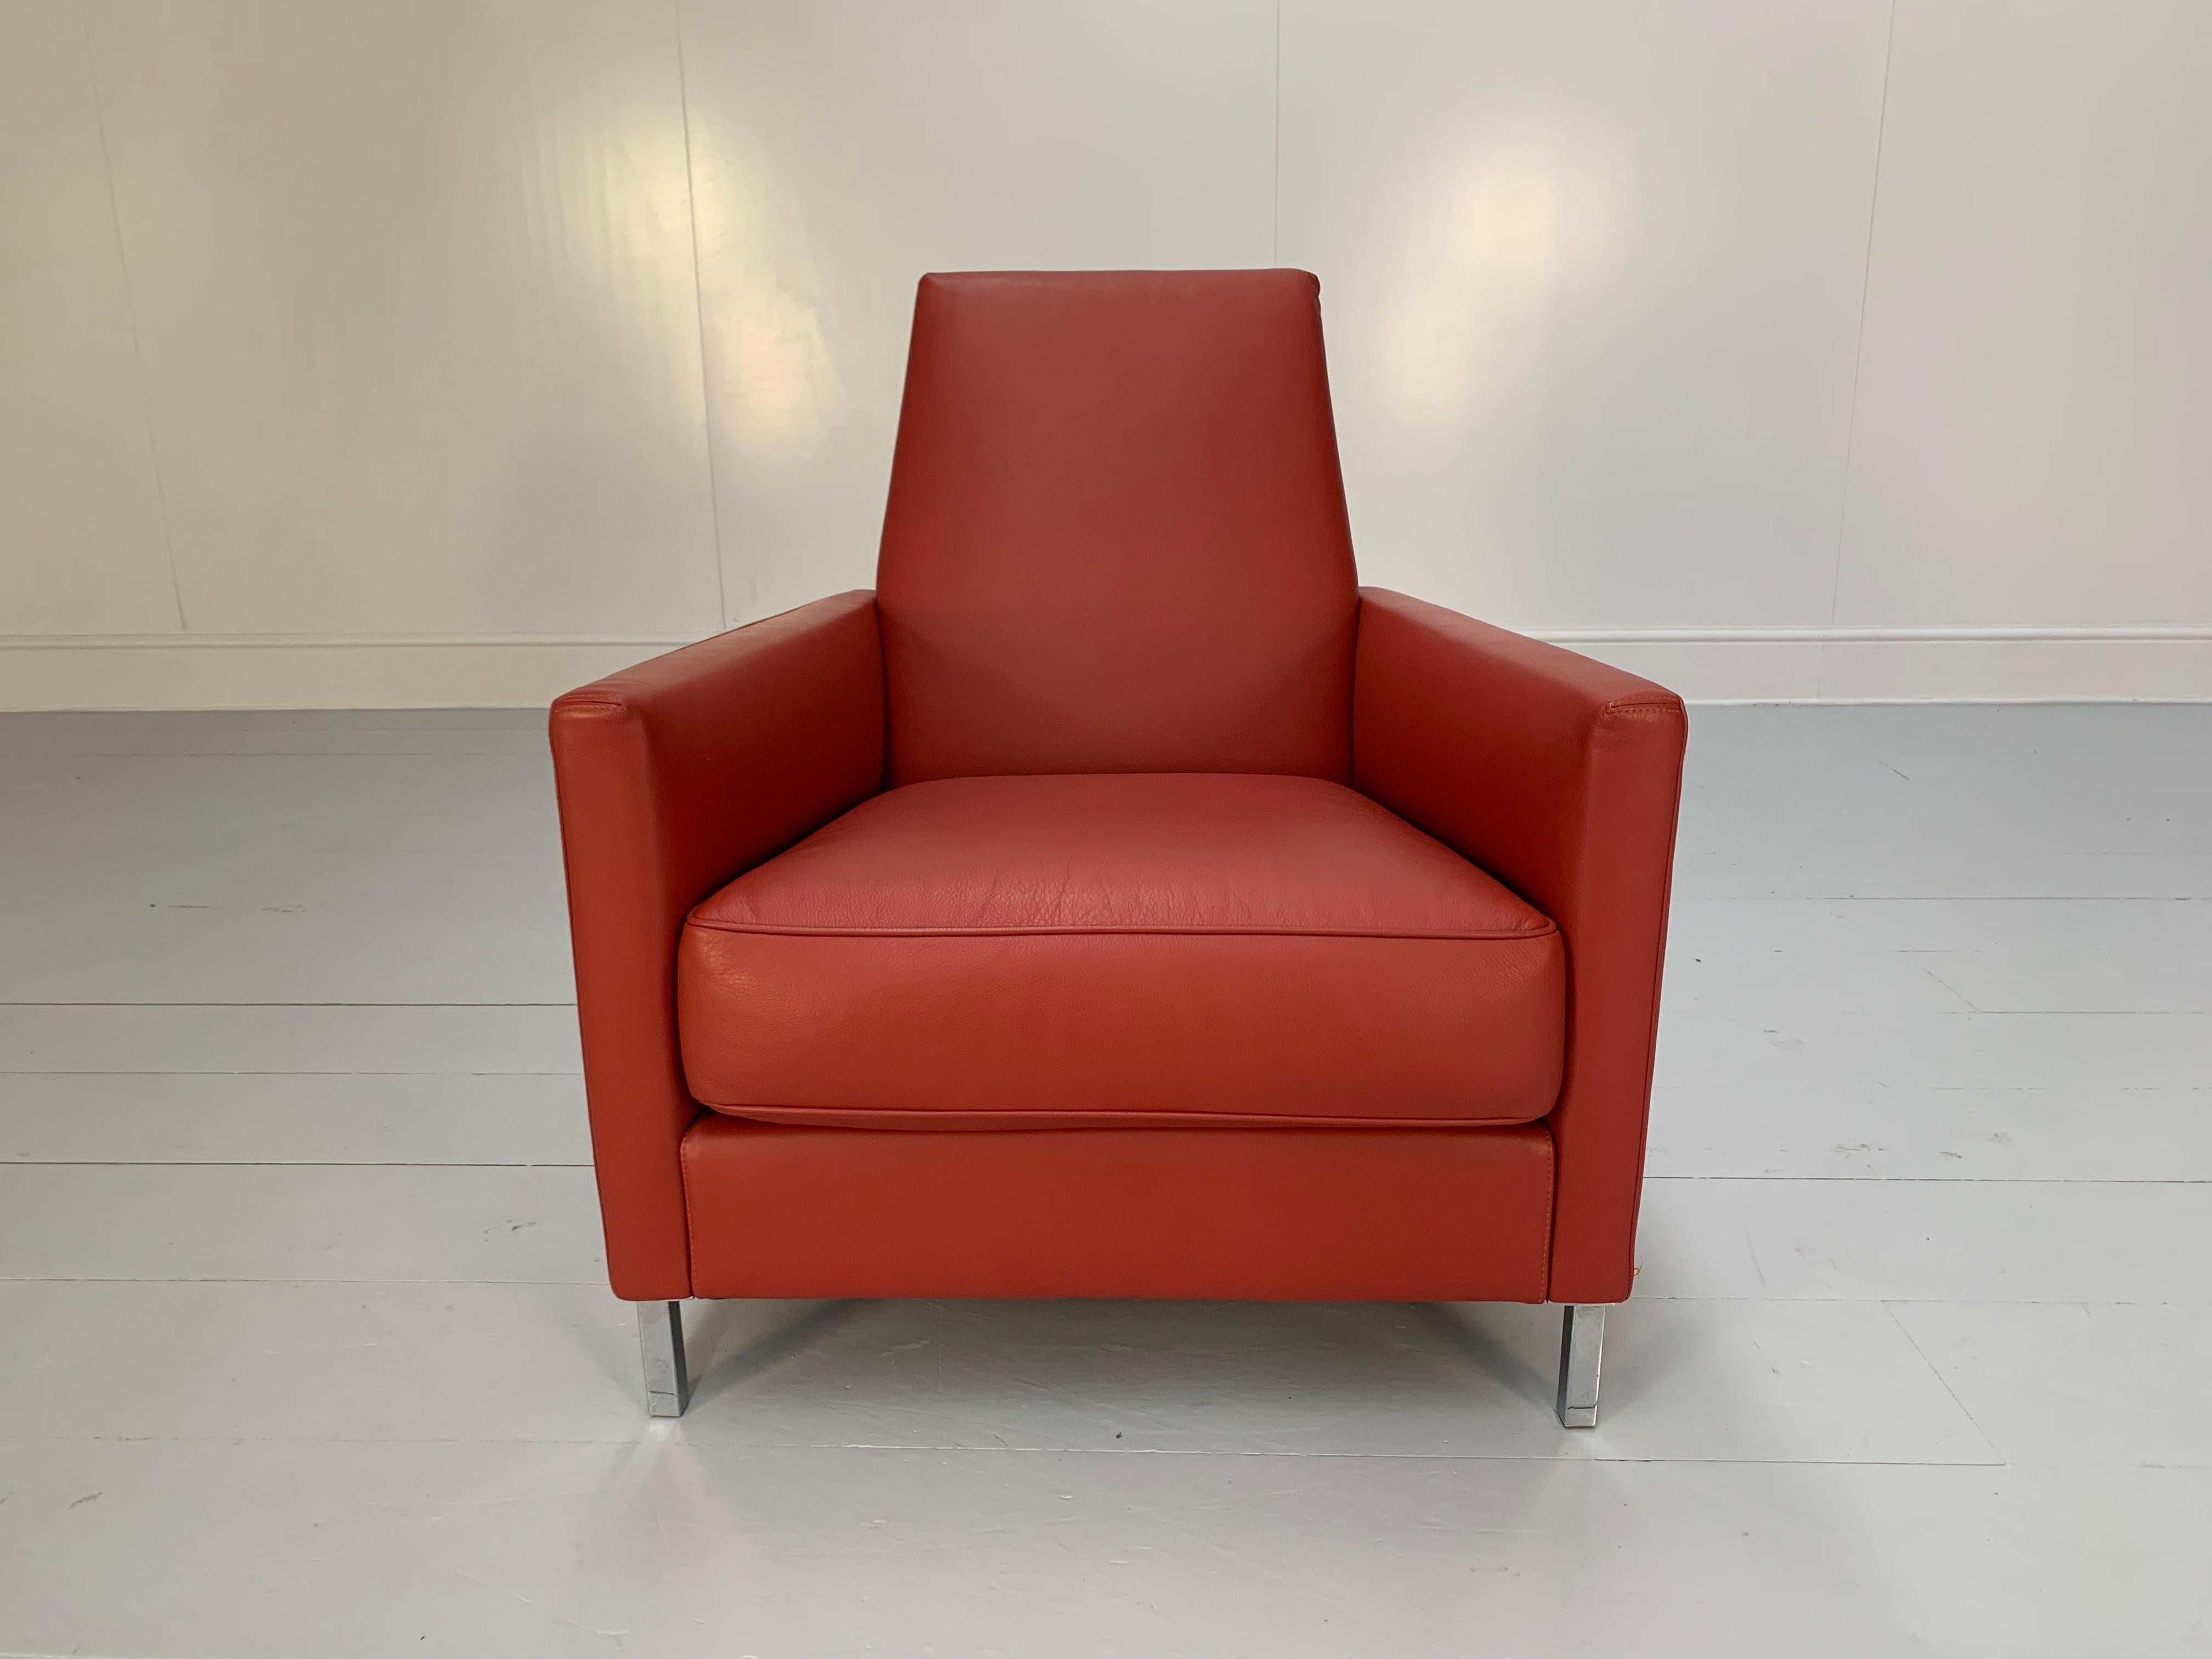 Moroso “Hyde Park” Sofa & 2 Armchair Suite, in Red “Pelle” Leather For Sale 6